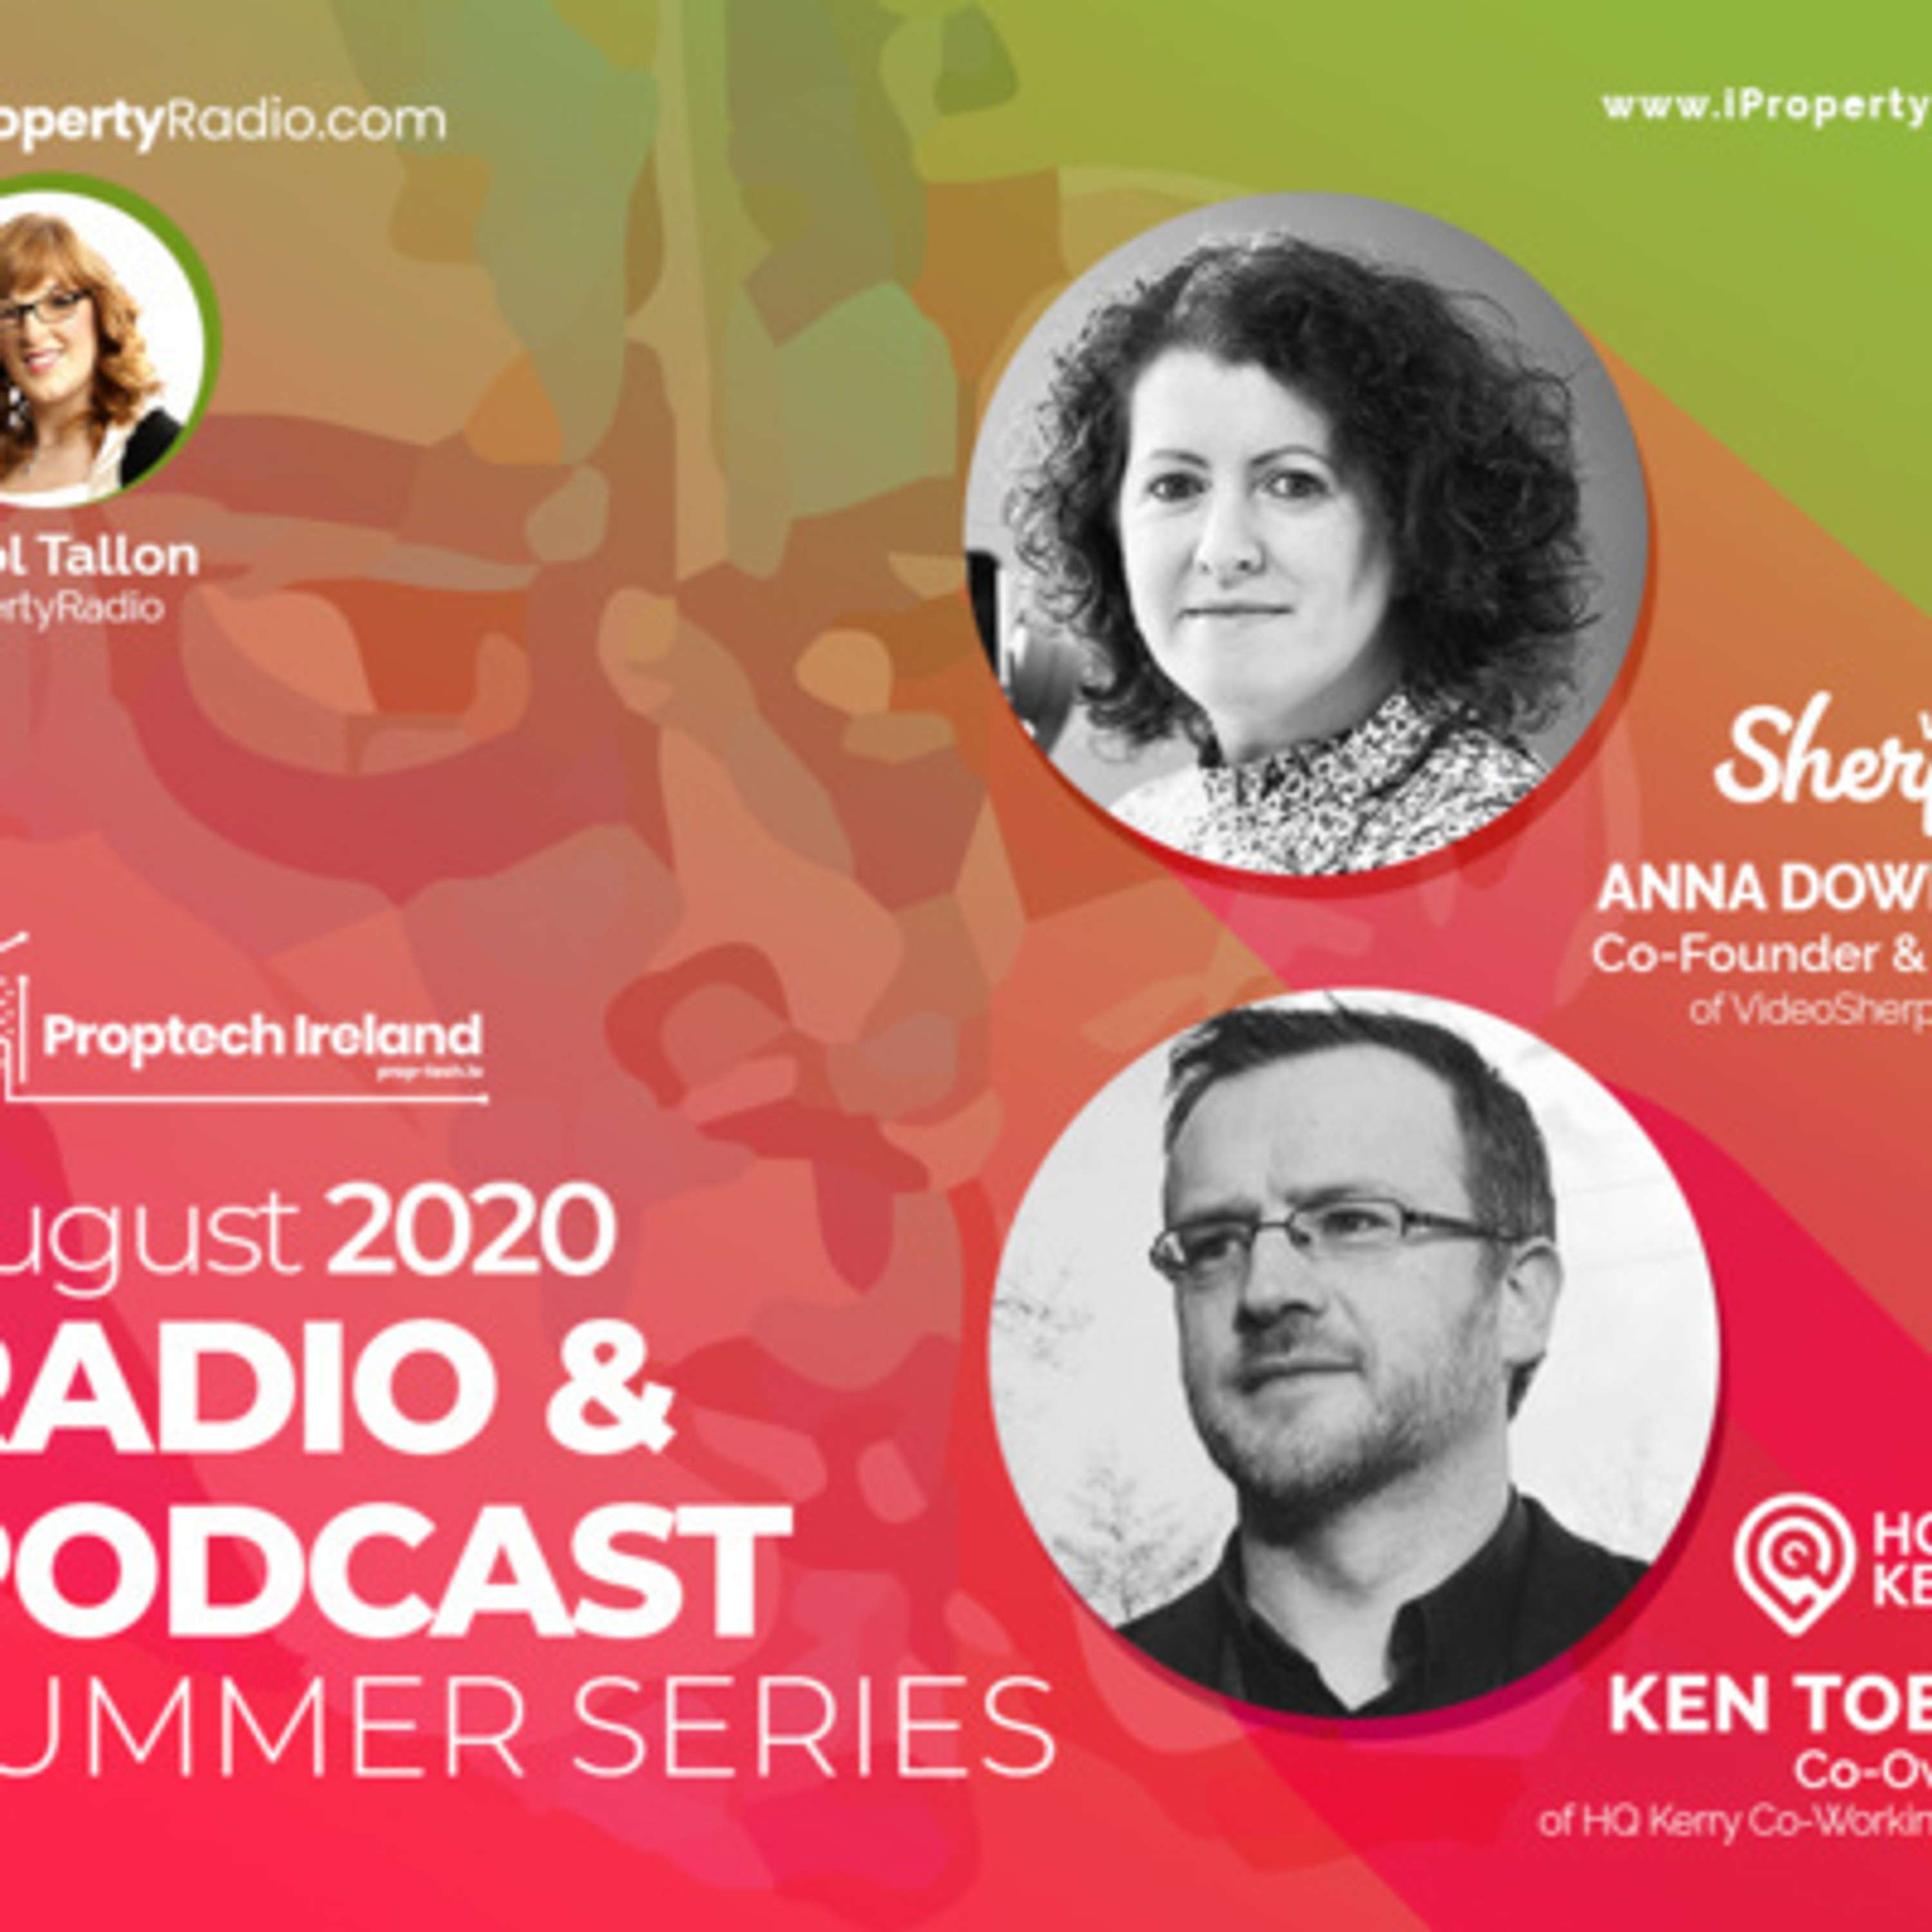 iPropertyRadio Summer Series, in association with Proptech Ireland: VideoSherpa.com & HQ.Kerry